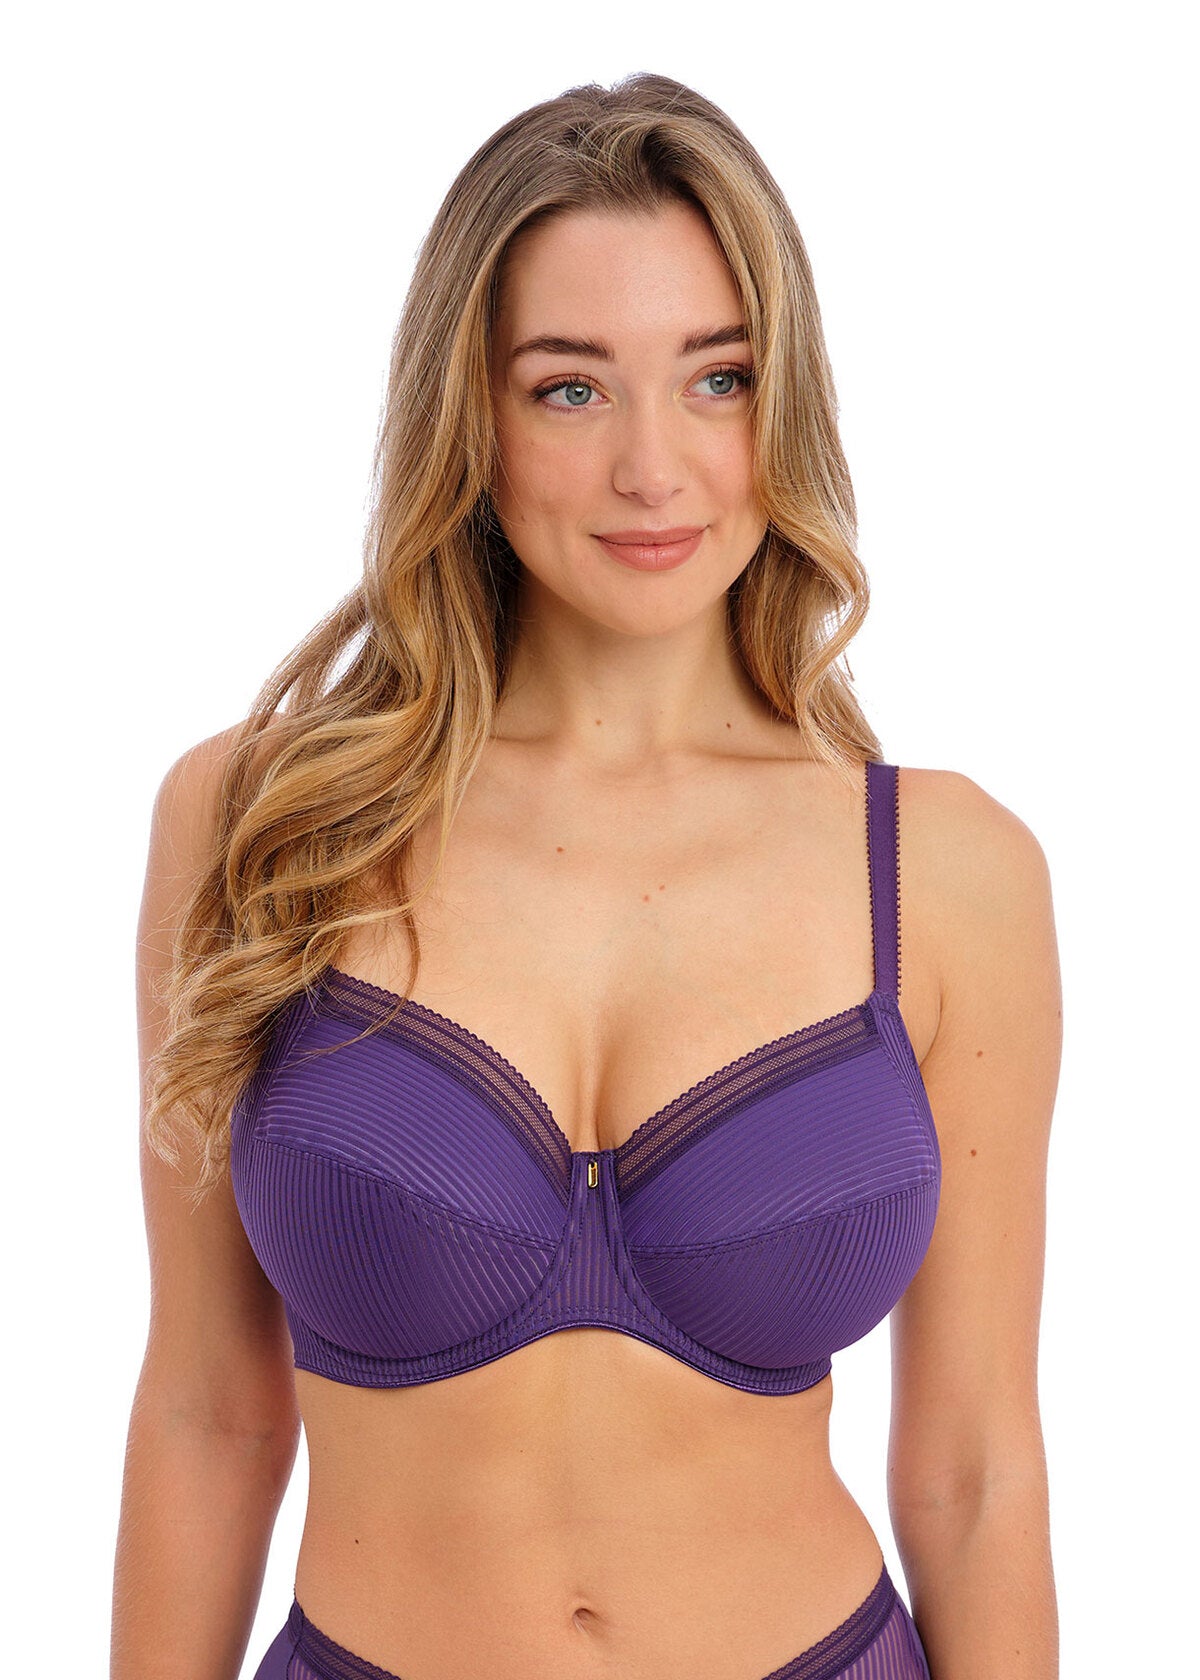 Shaws Department Stores - Fantasie Lingerie 🌺 Our best selling Fantasie  Illusion Bra is now available in this beautiful colour Willow for only €42!  Visit us in store @shawsdepartmentstores to have a